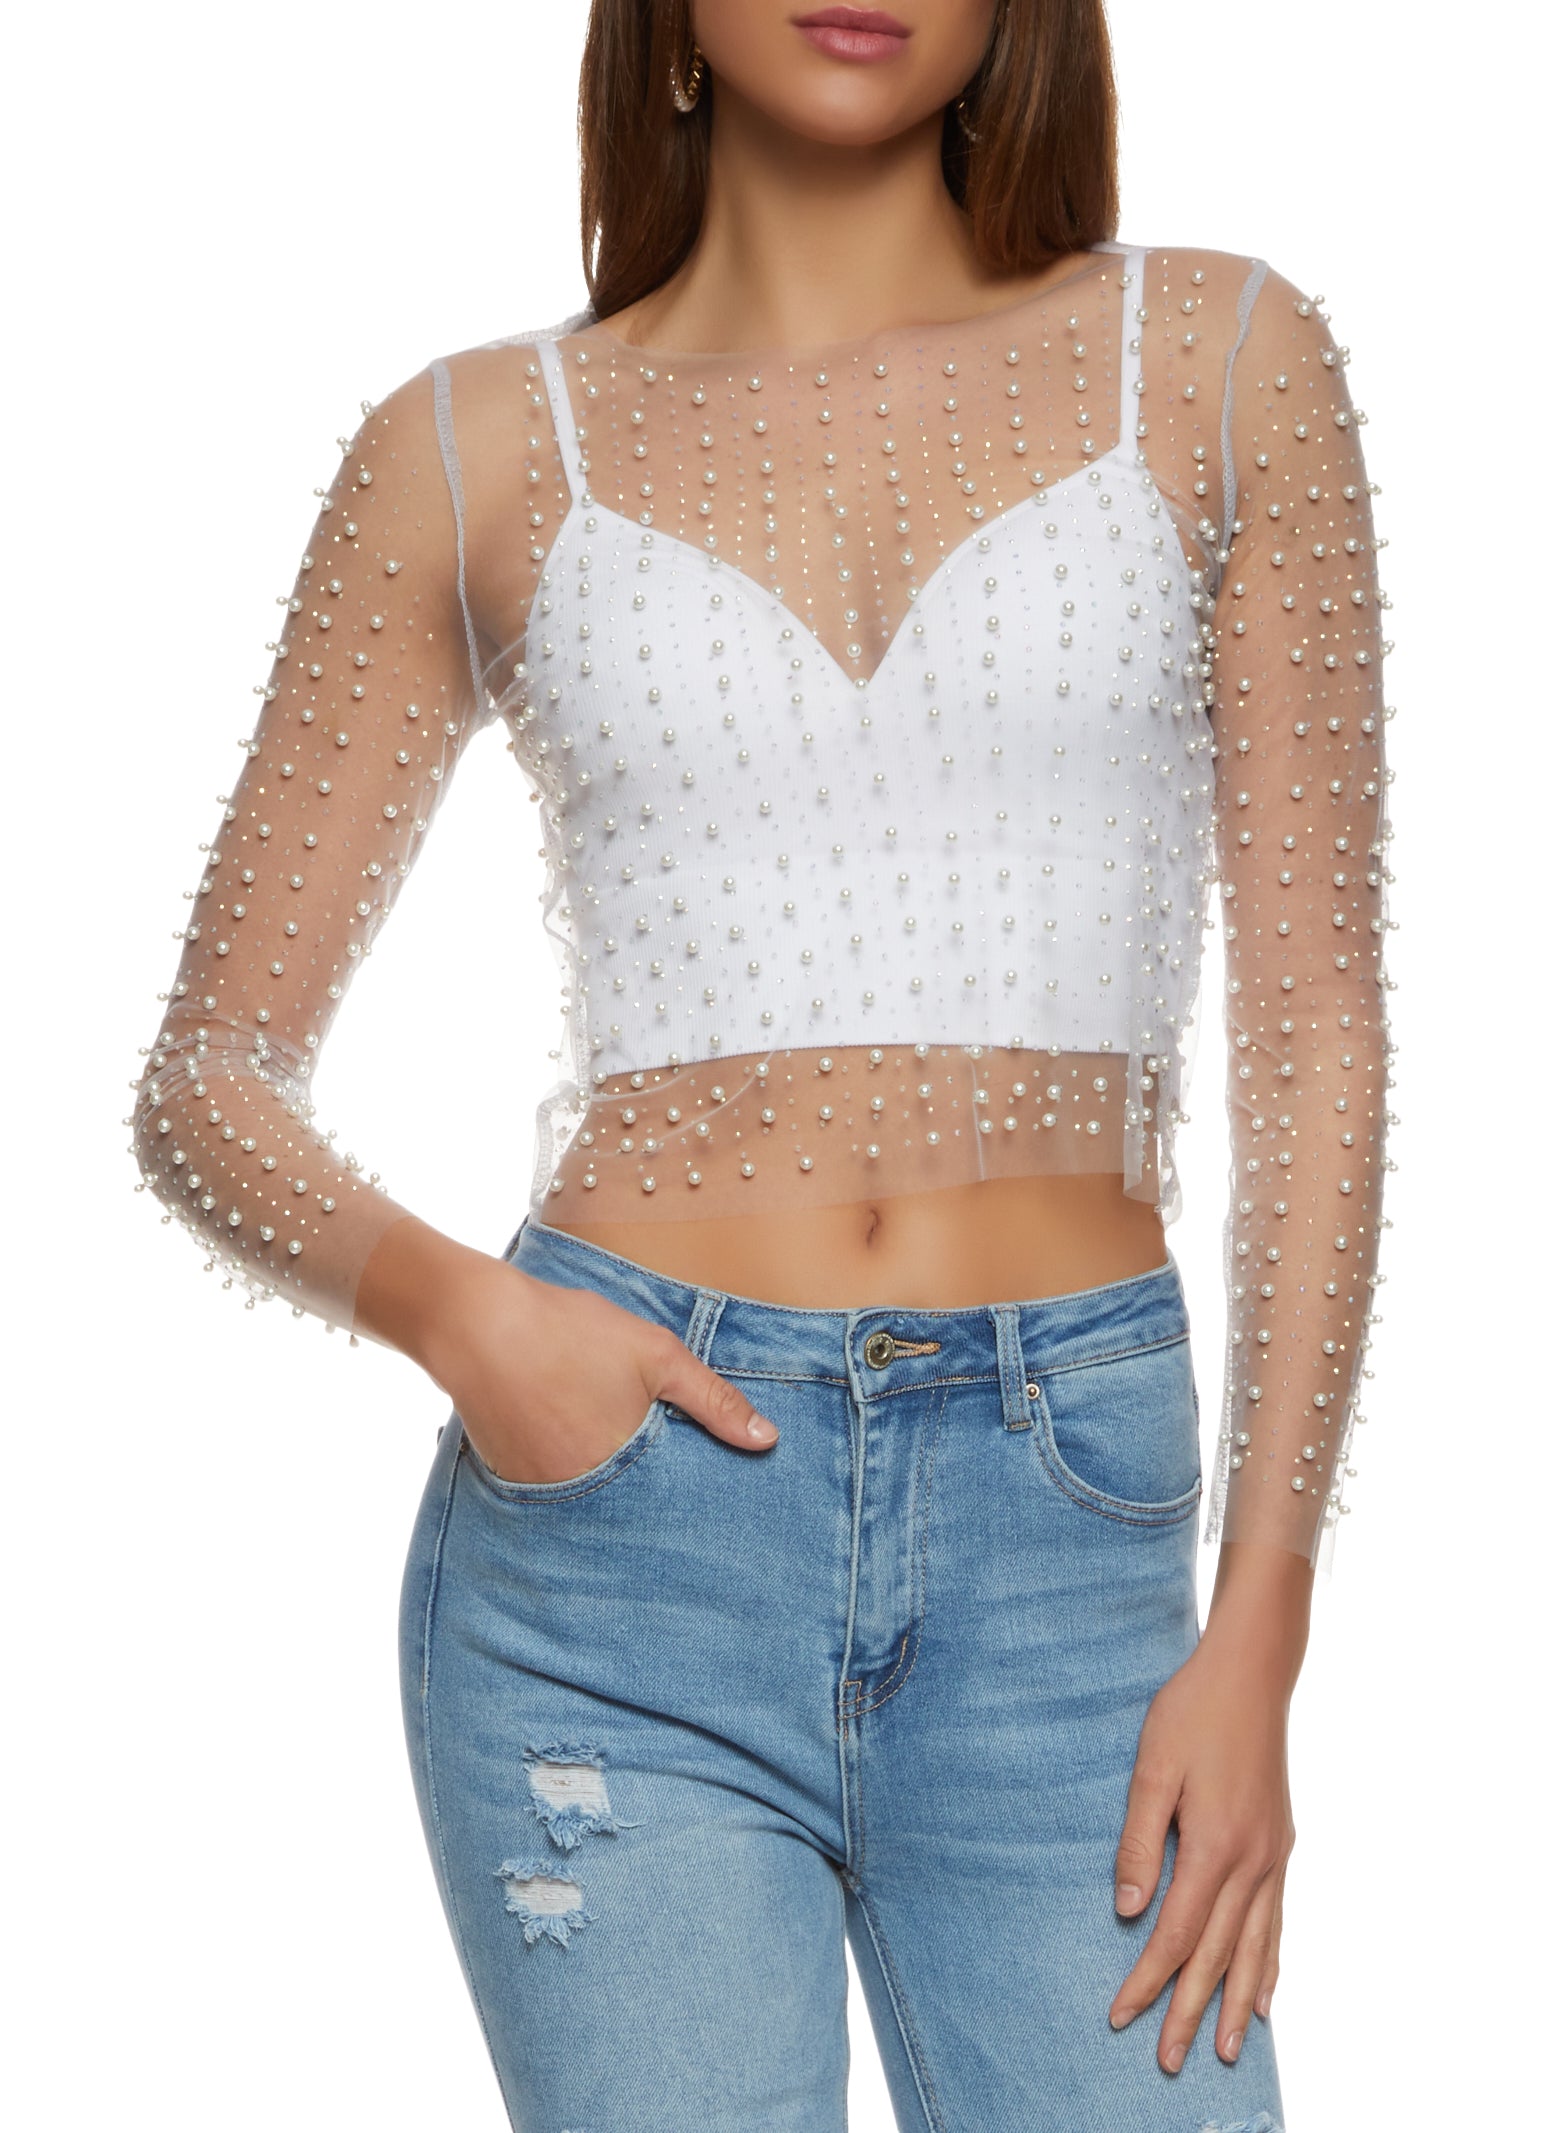 White Crop Tops, Everyday Low Prices